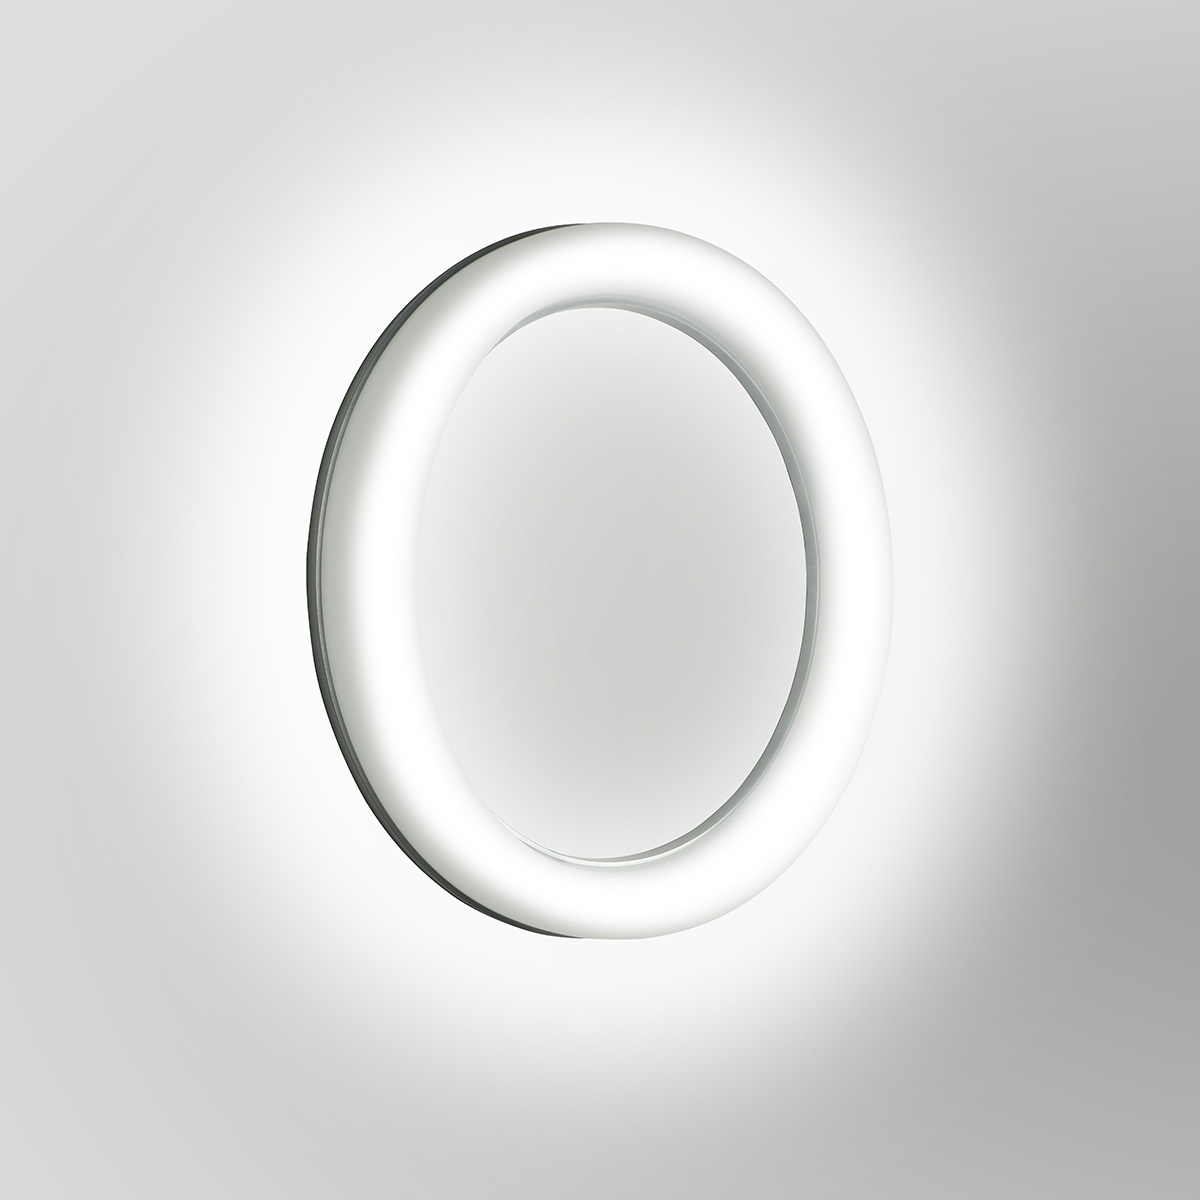 A fully luminous ring sconce